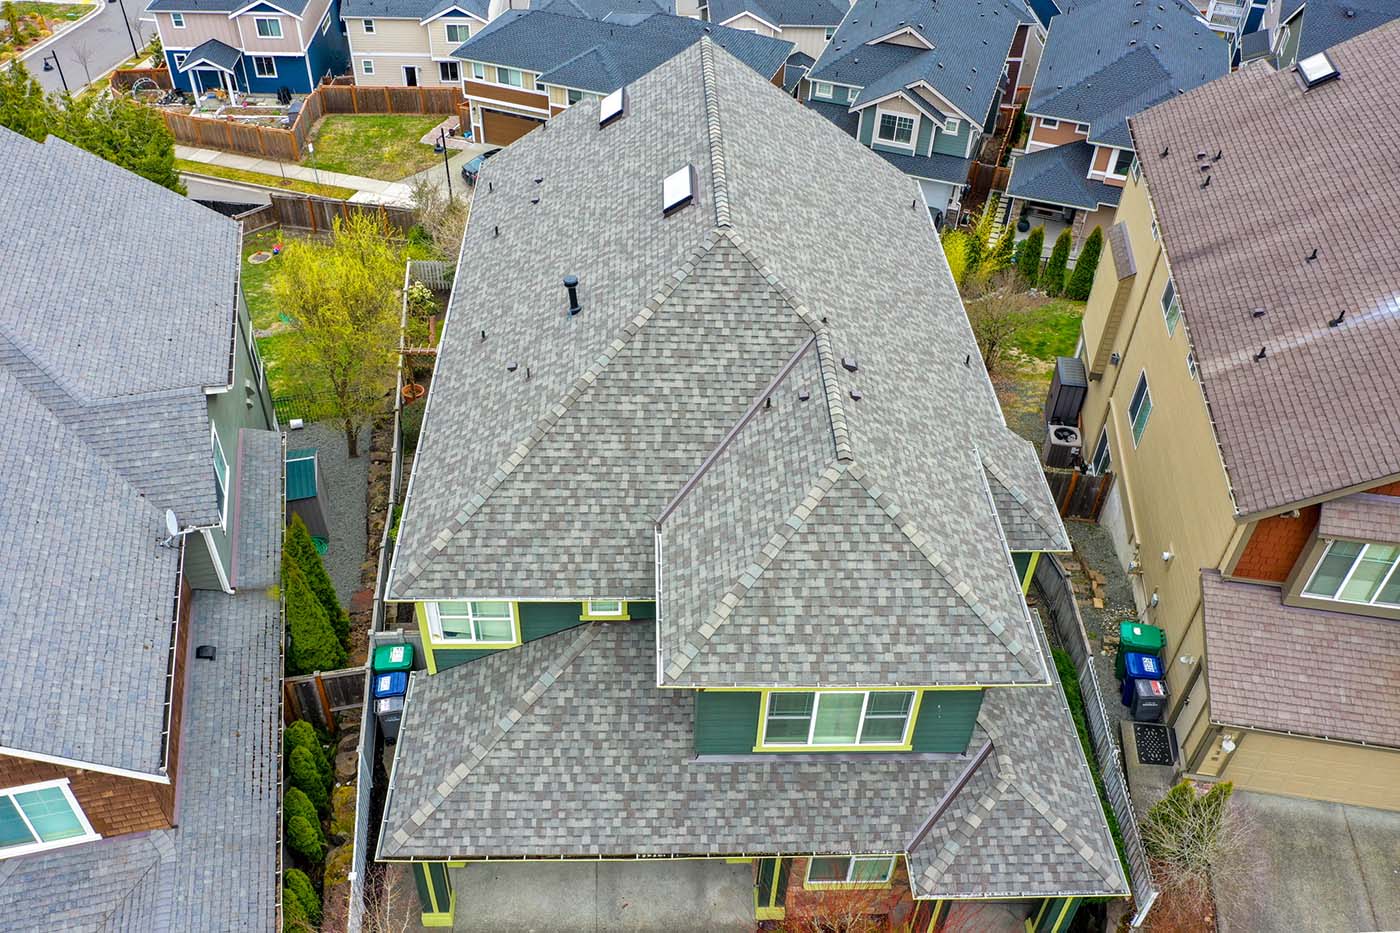 New Composite Asphalt Shingles Roof in Issaquah, Washington - overhead view of roof from an angle